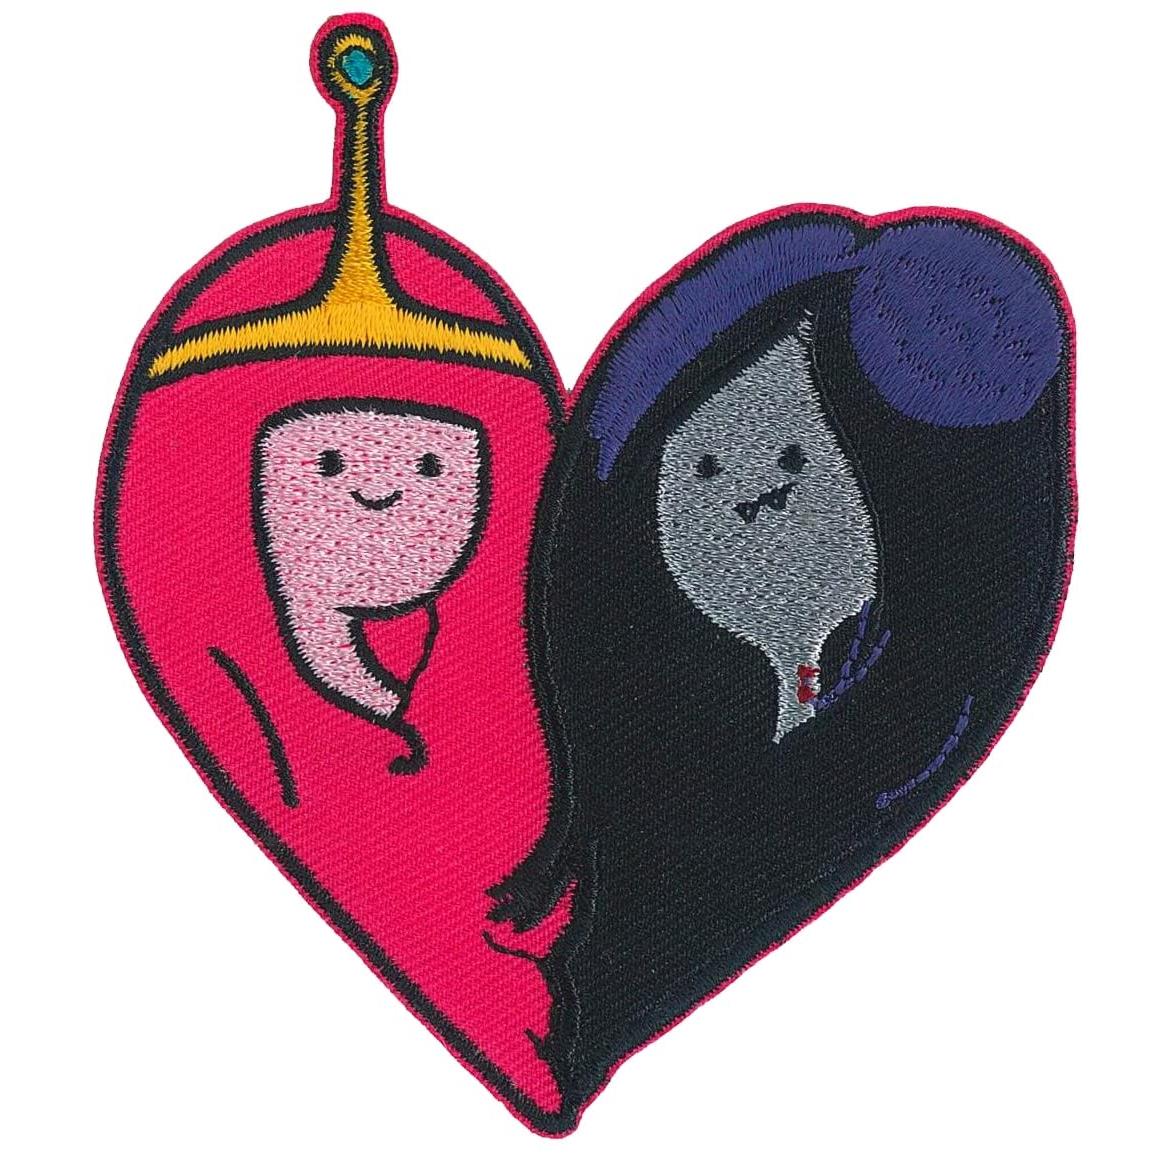 C&D Visionary Adventure Time PB + Marcy Heart Patch, Pink, Black